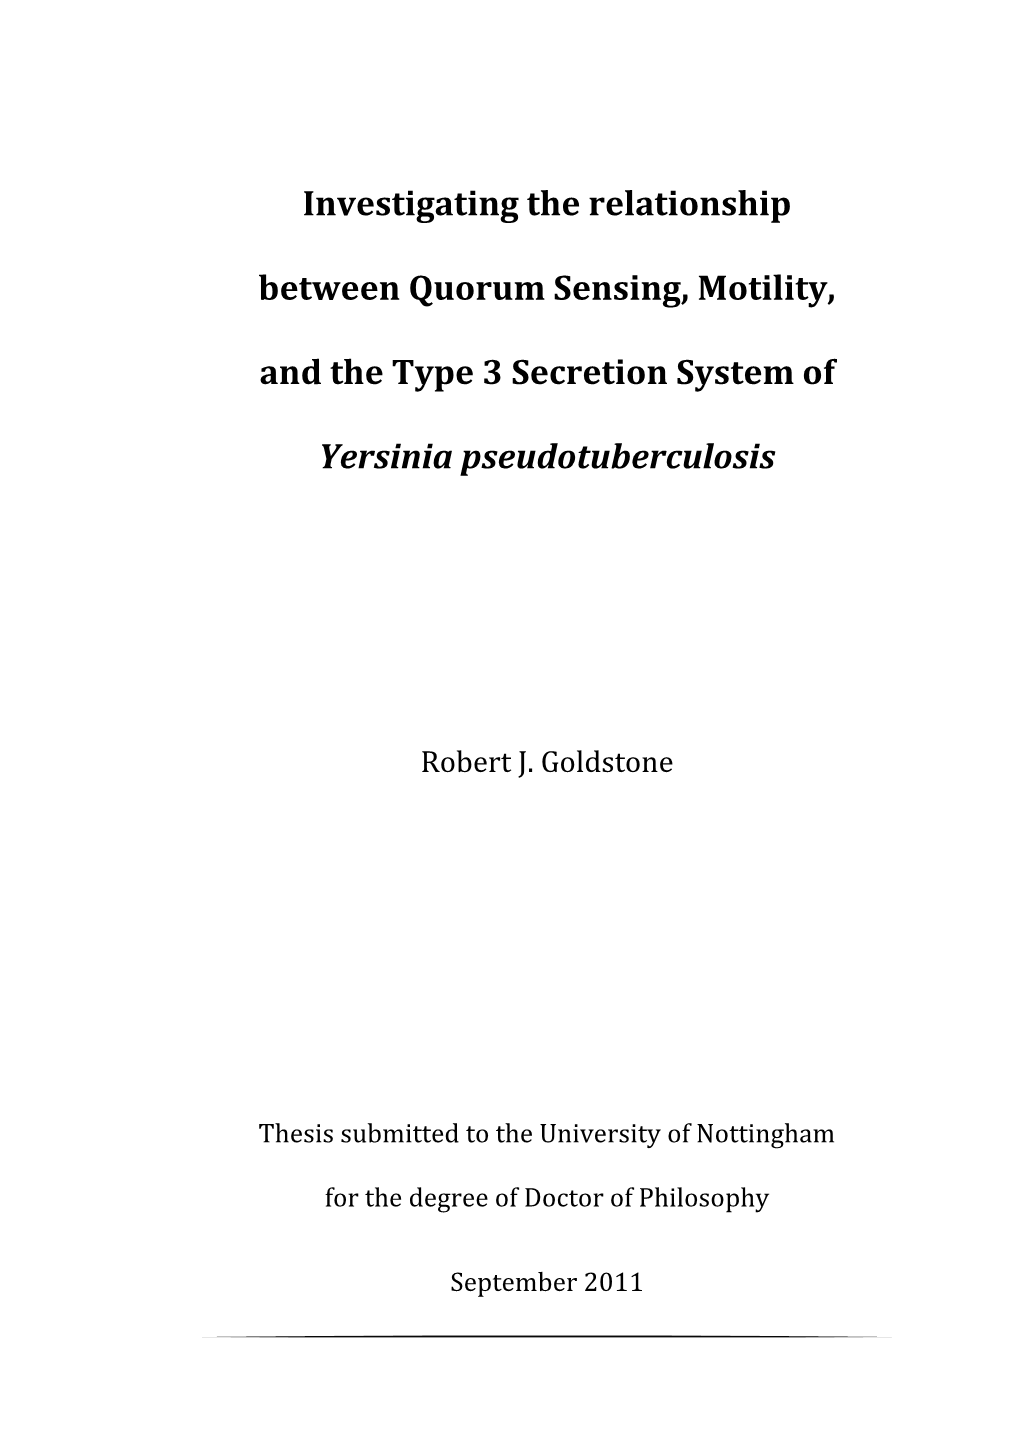 Investigating the Relationship Between Quorum Sensing, Motility, and the Type 3 Secretion System Of